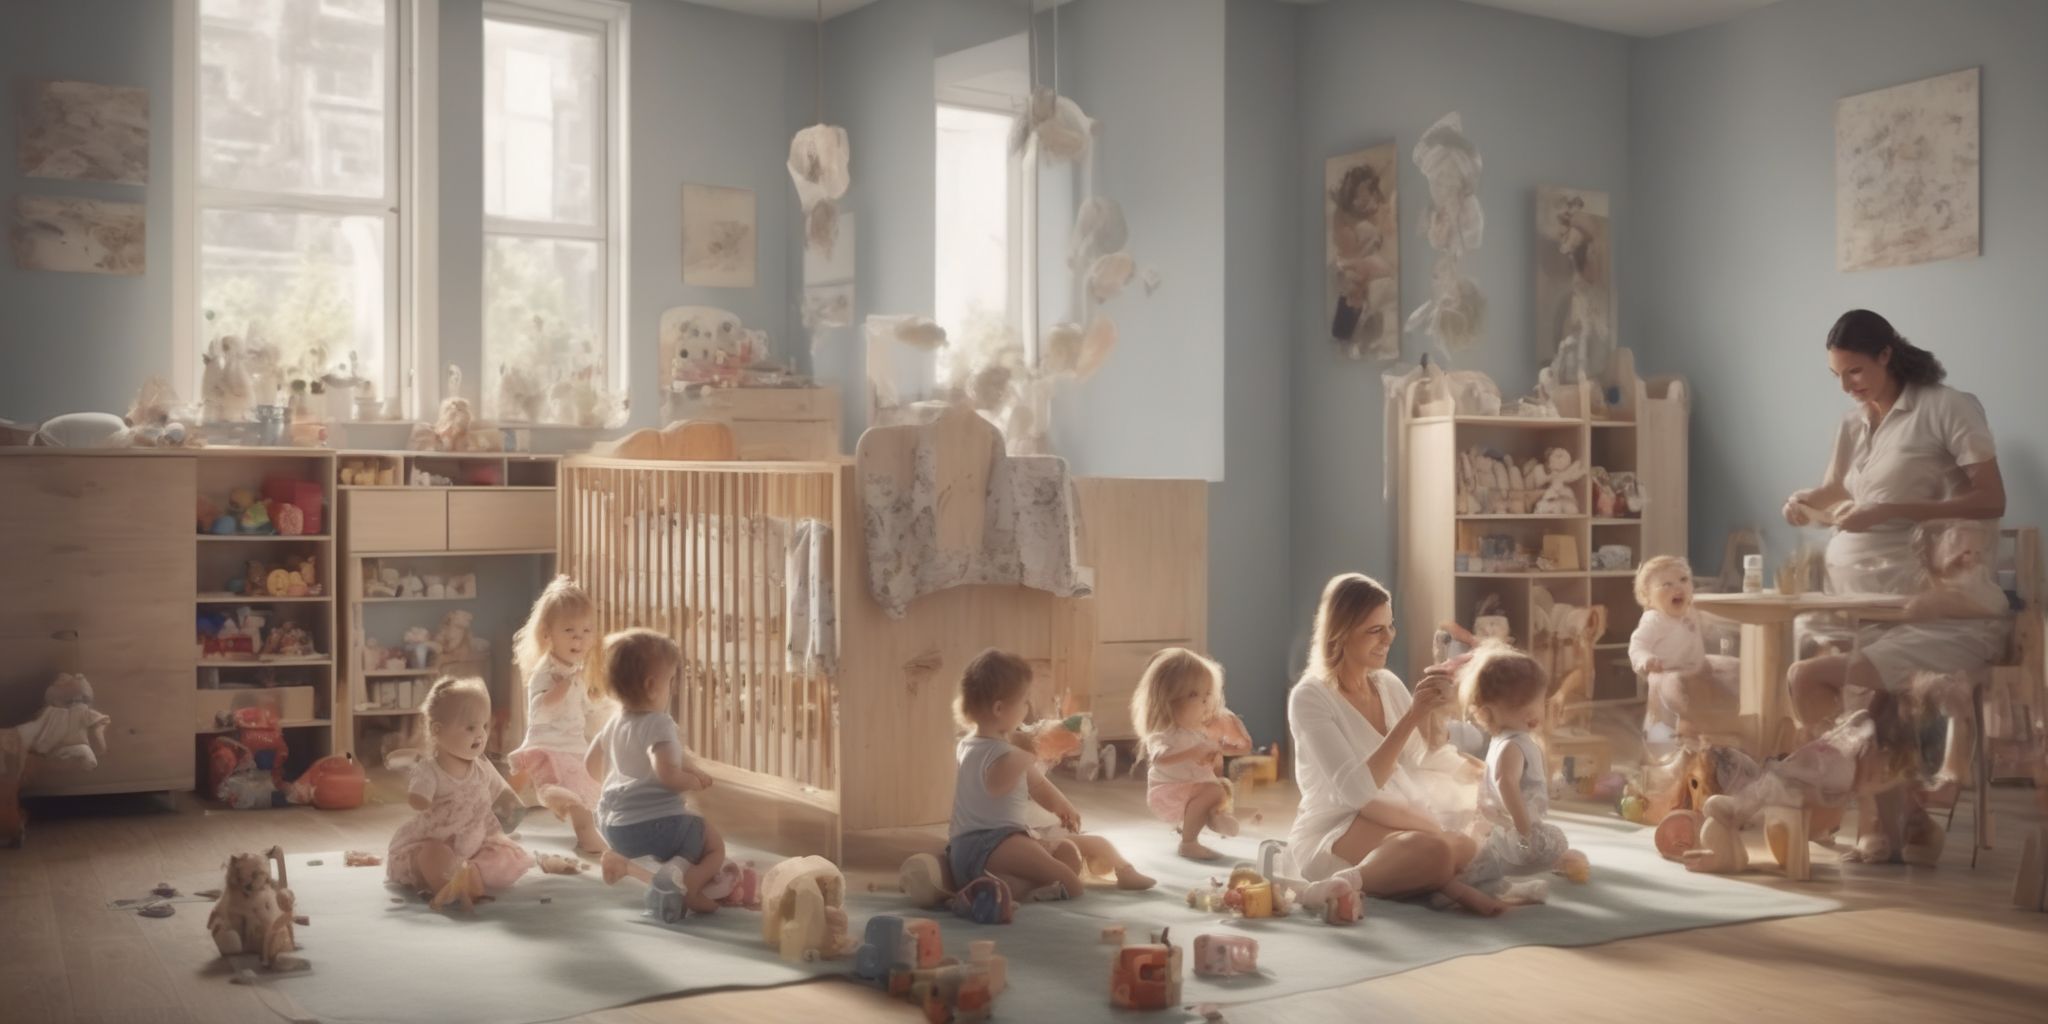 Childcare  in realistic, photographic style